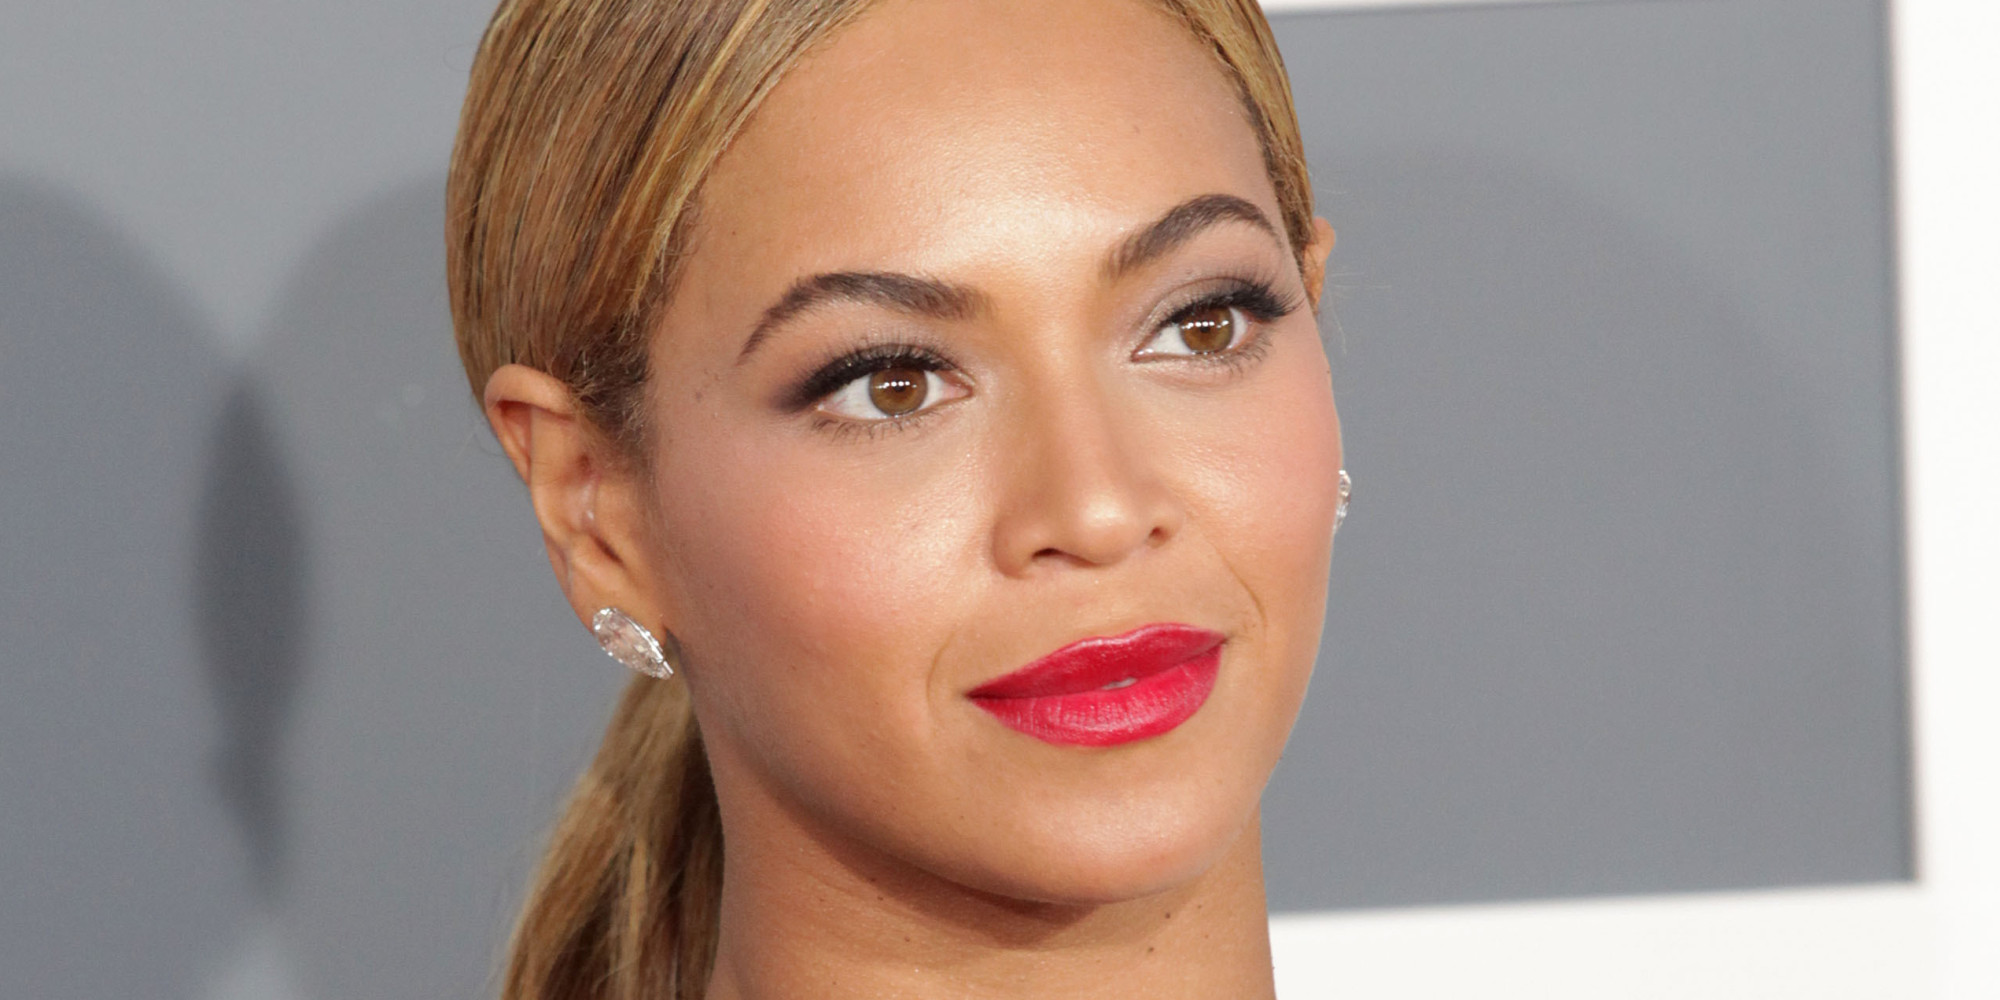 Beyoncé Wants You to Drink This Watermelon Water, But Is